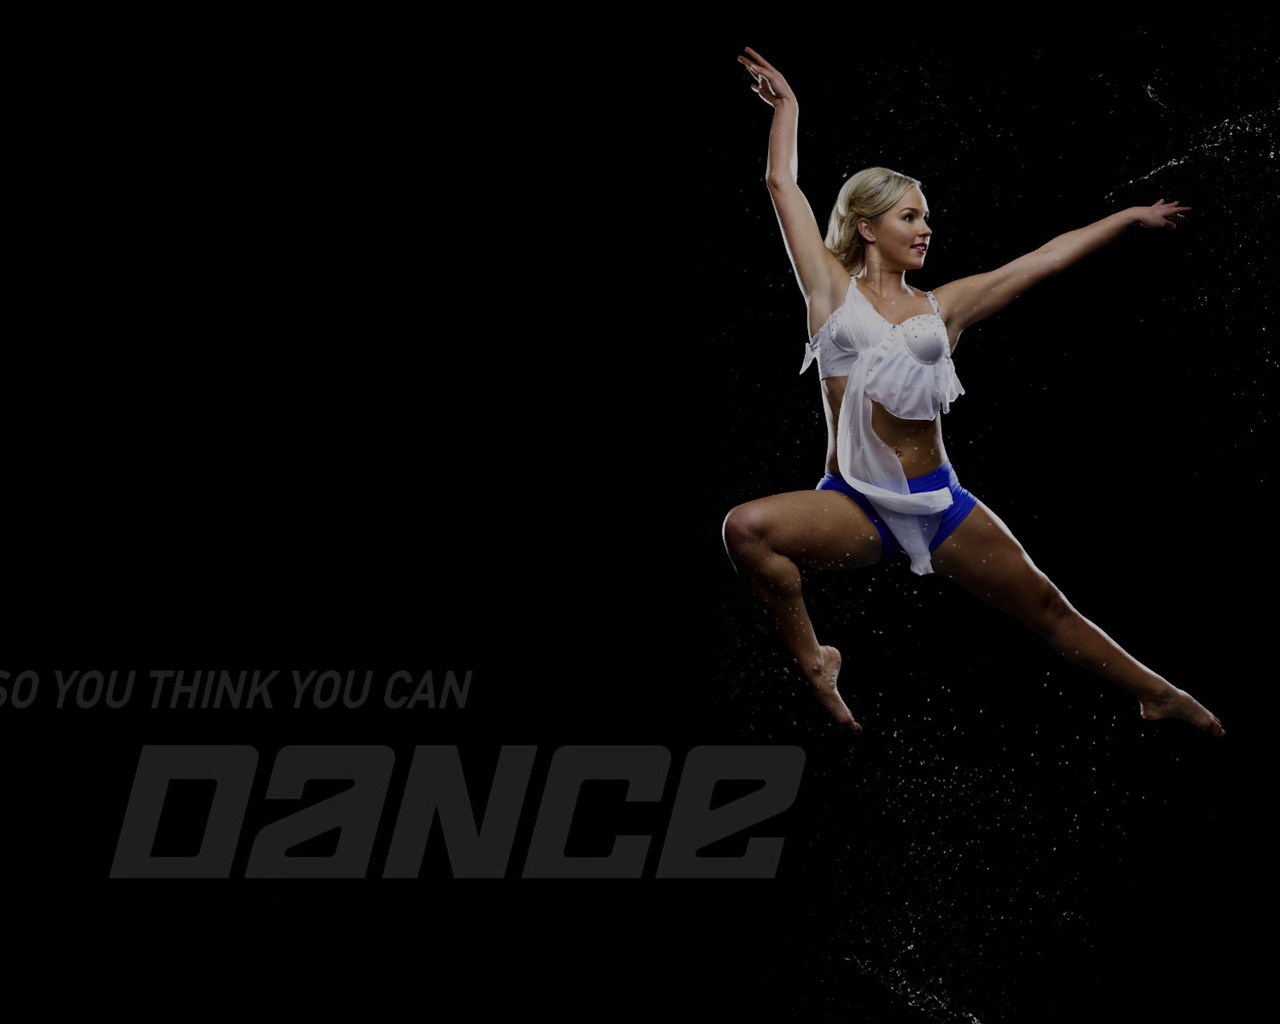 So You Think You Can Dance wallpaper (2) #11 - 1280x1024